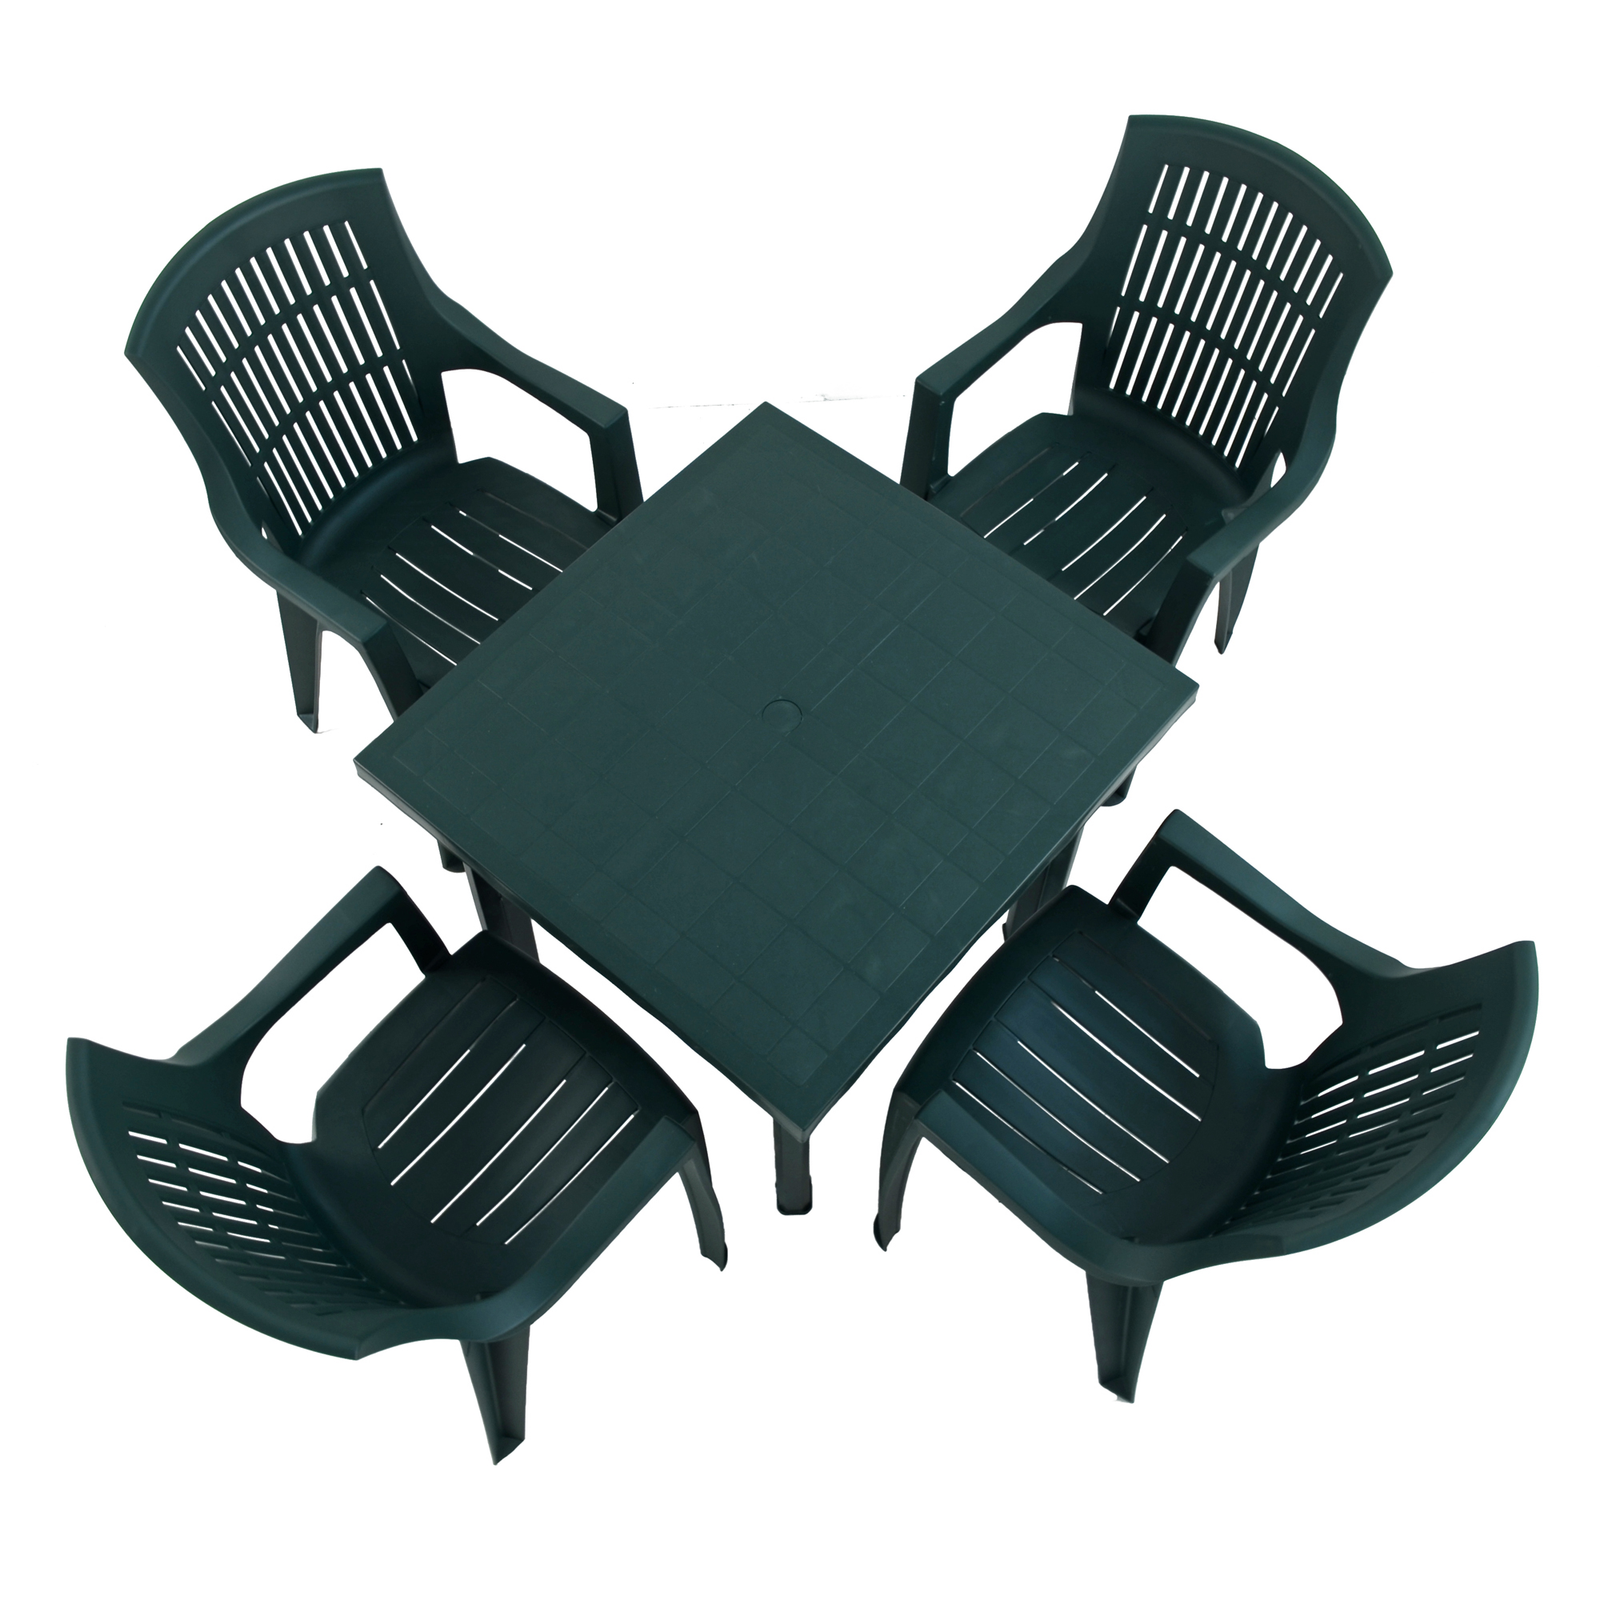 Trabella Rapino Square Table With 4 Parma Chairs Set Green Dining Sets Trabella Default Title  